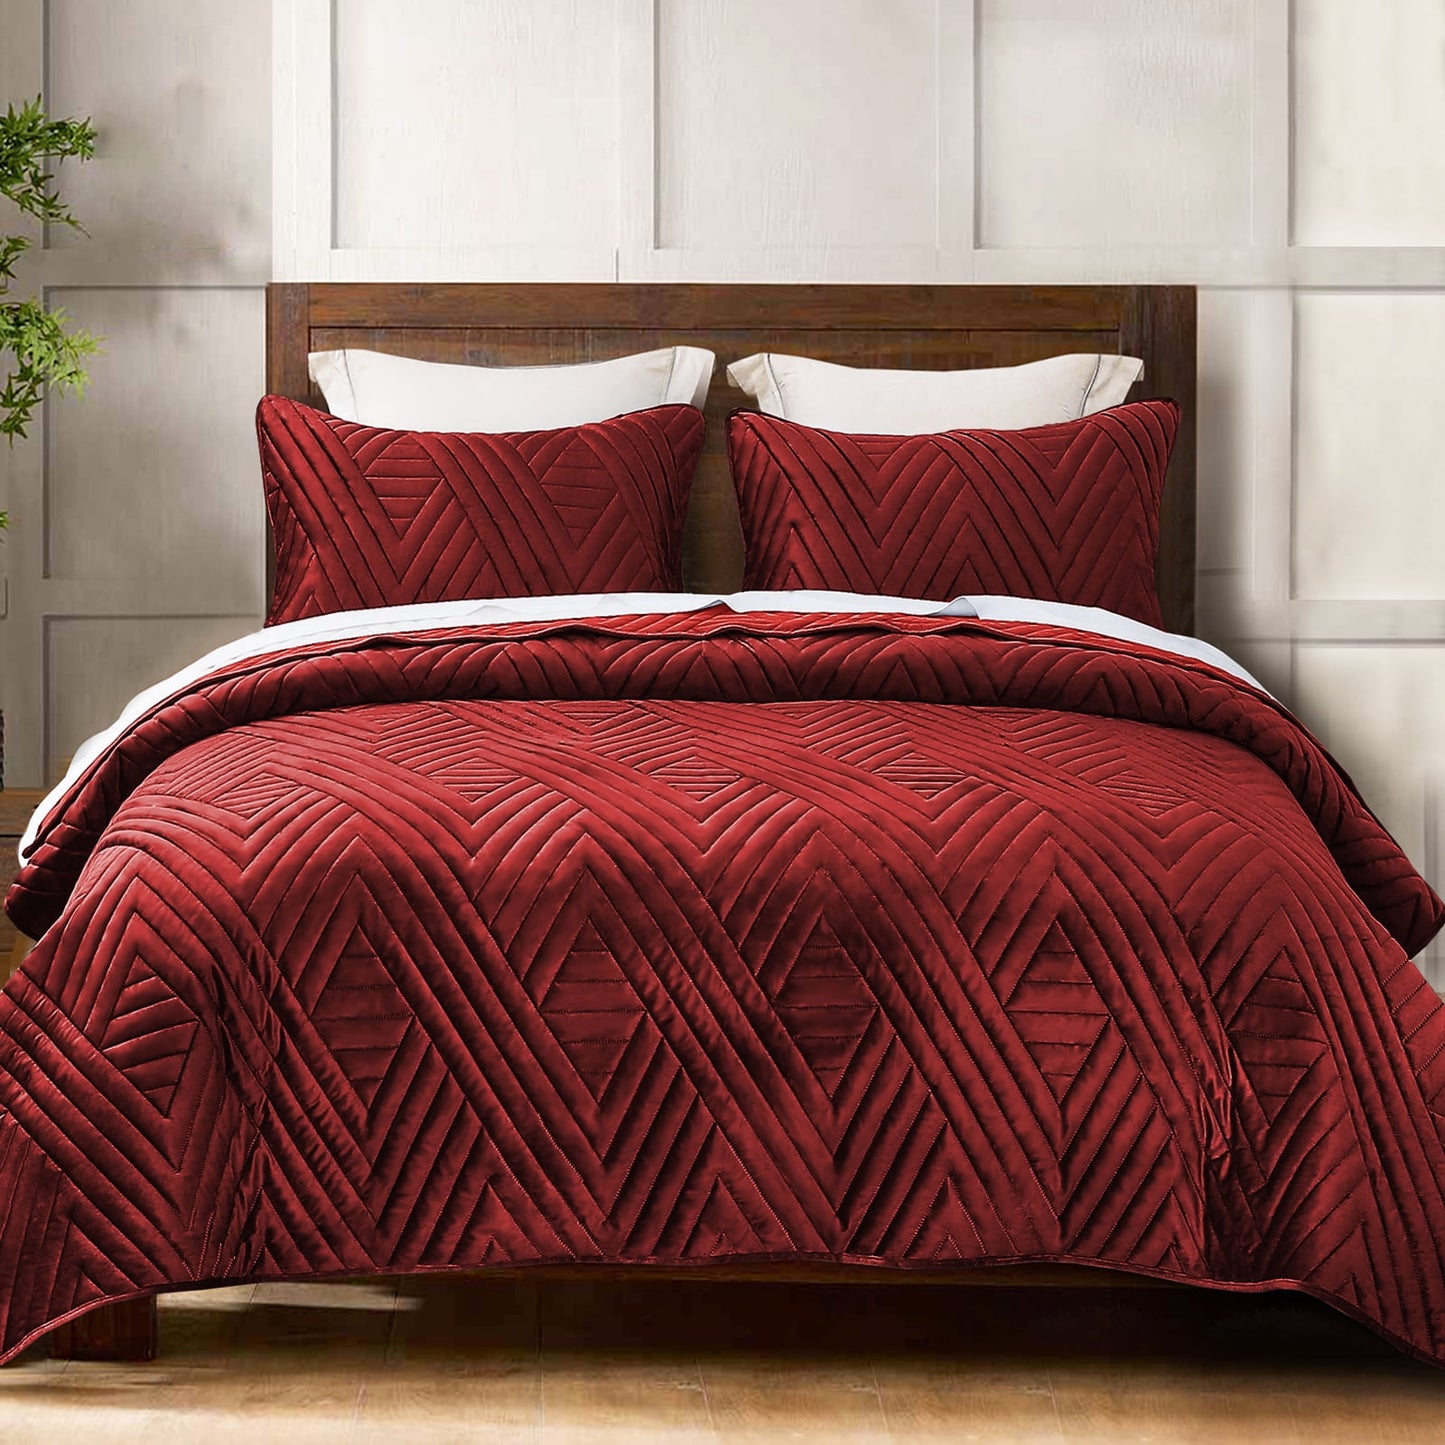 Exclusivo Mezcla Super Plush Velvet Quilt Twin Size with Pillow Sham, Luxury Soft Reversible 2 Piece Bedspreads Coverlet Comforter Set for All Seasons, Lightweight and Warm, Rust Red